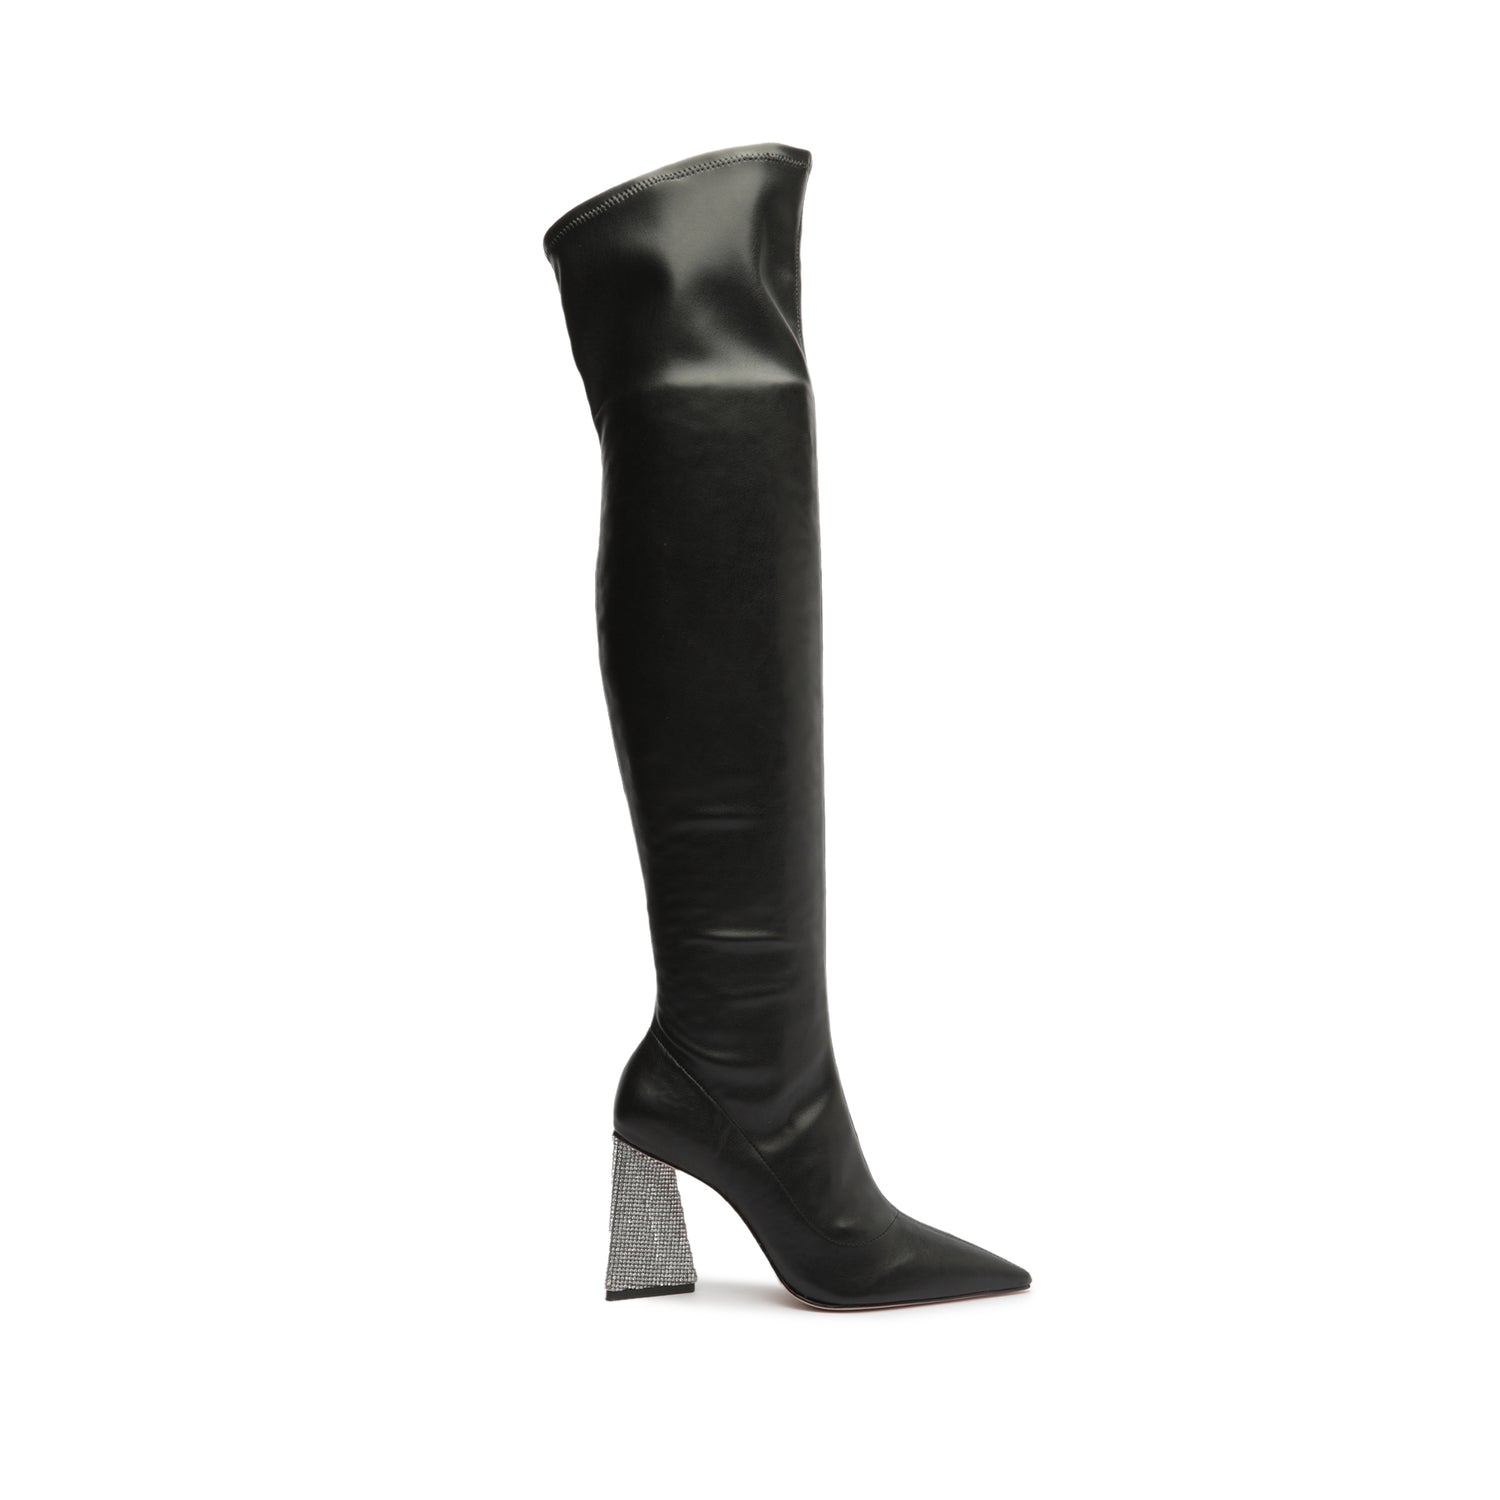 Cyrus Up Nappa Leather Boot Boots Sale 5 Black Nappa Leather - Schutz Shoes